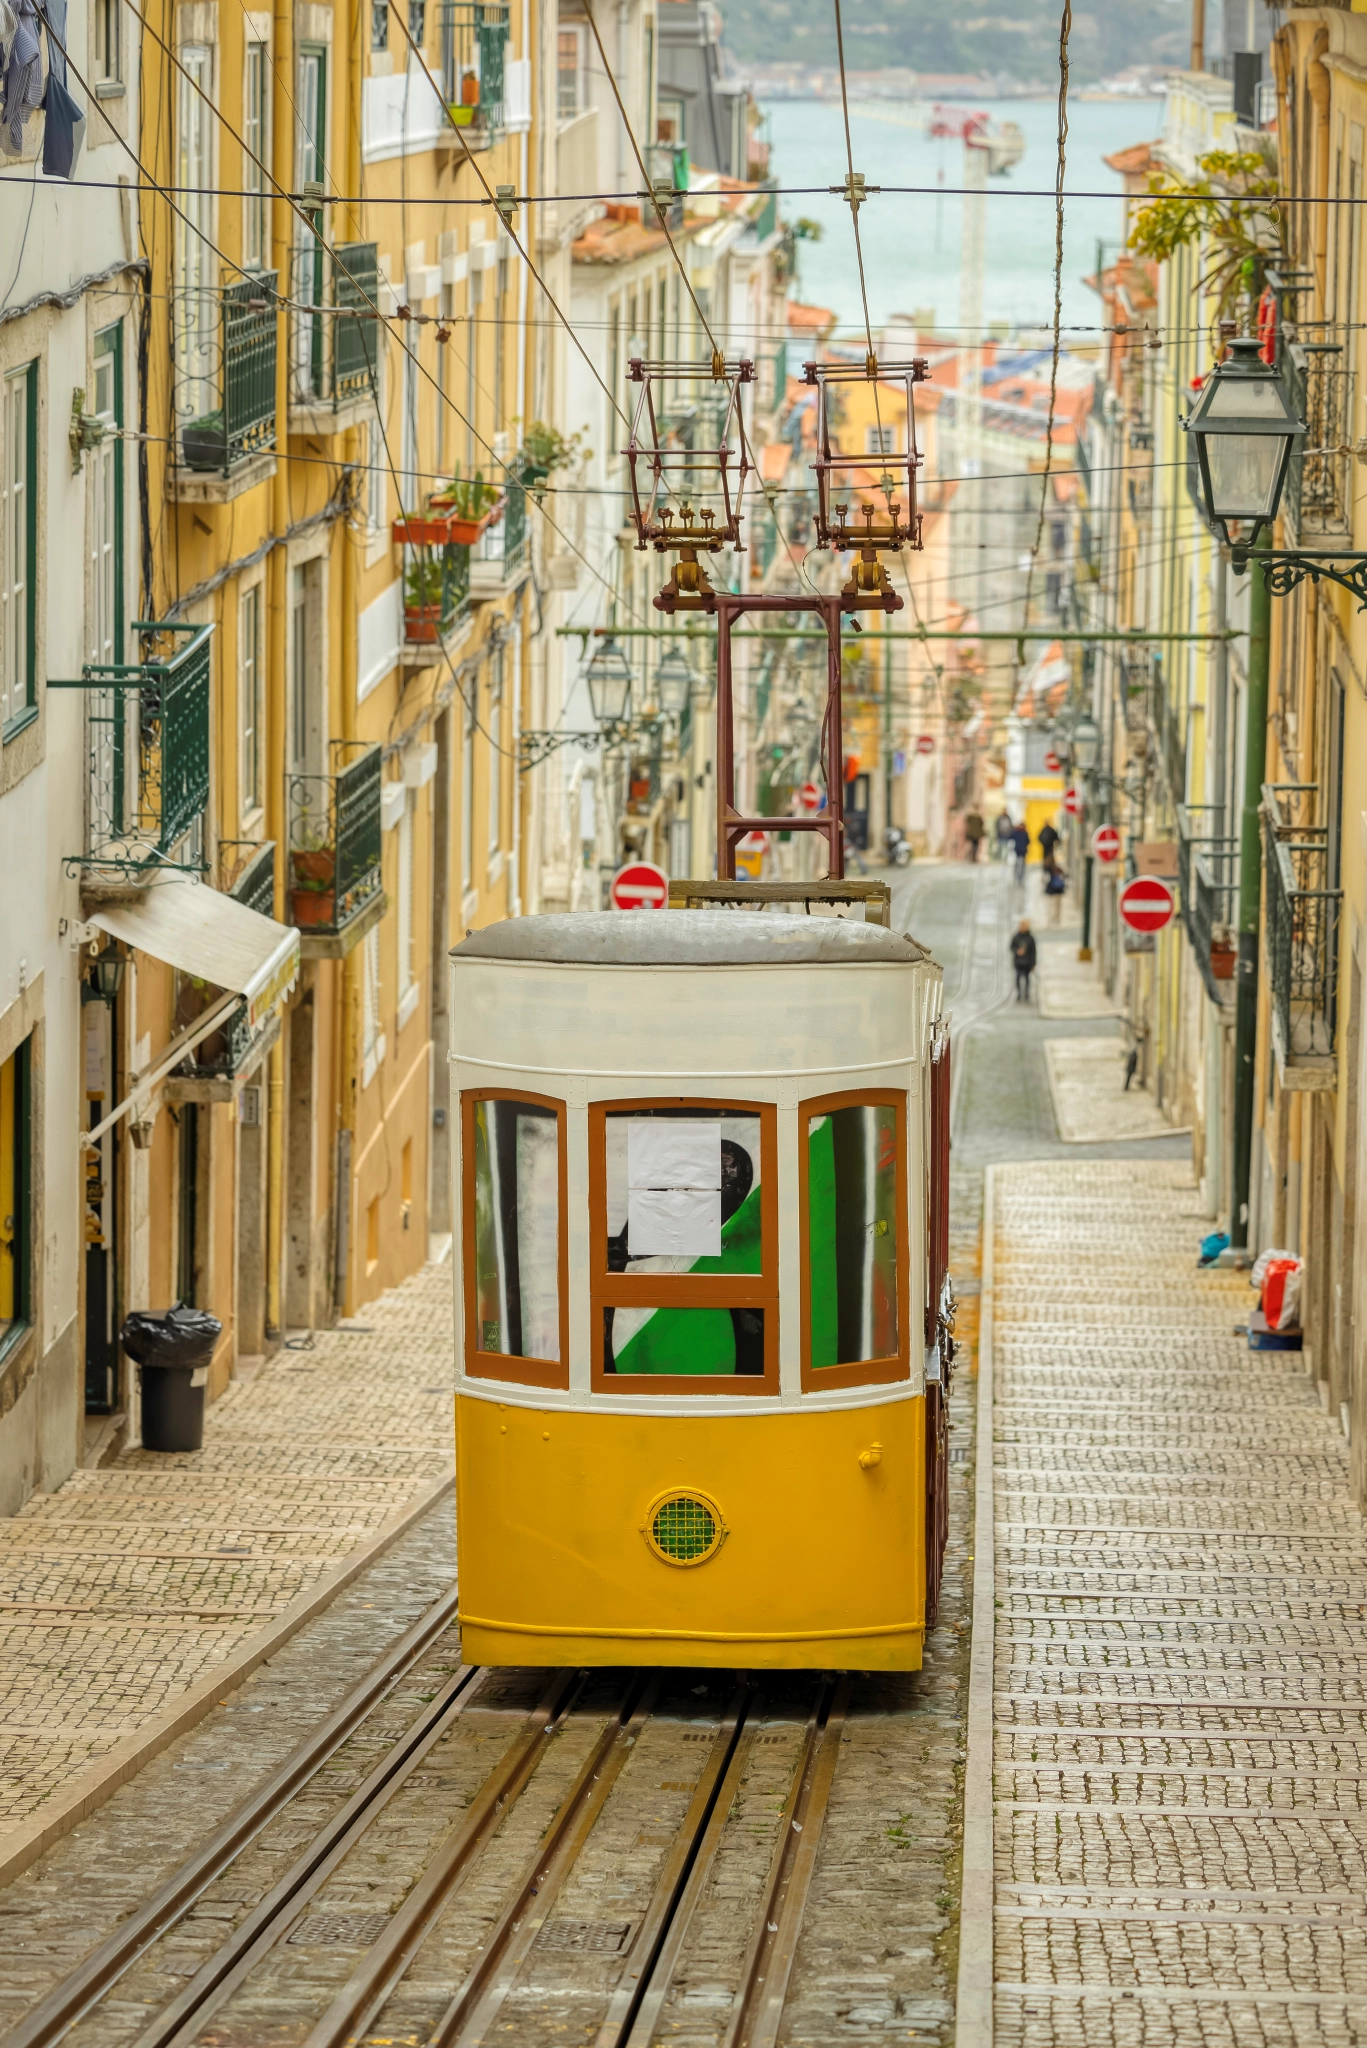 The Bica funicular in Lisbon old quarters